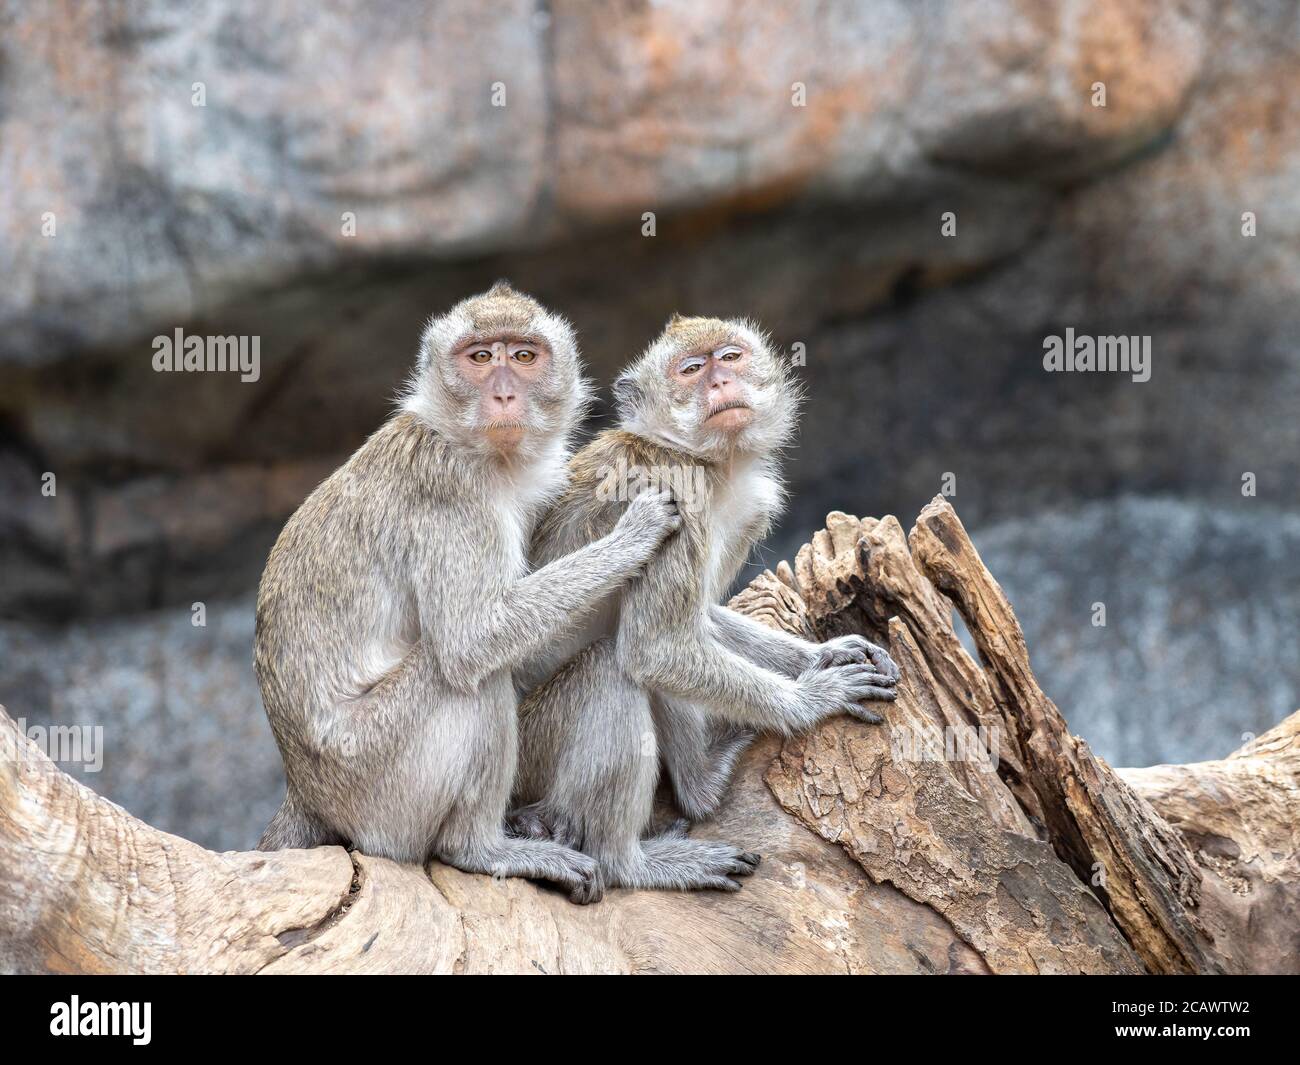 Formosan Rock Macaques, are the endemic species of Taiwan, in Hsinchu Zoo. Stock Photo